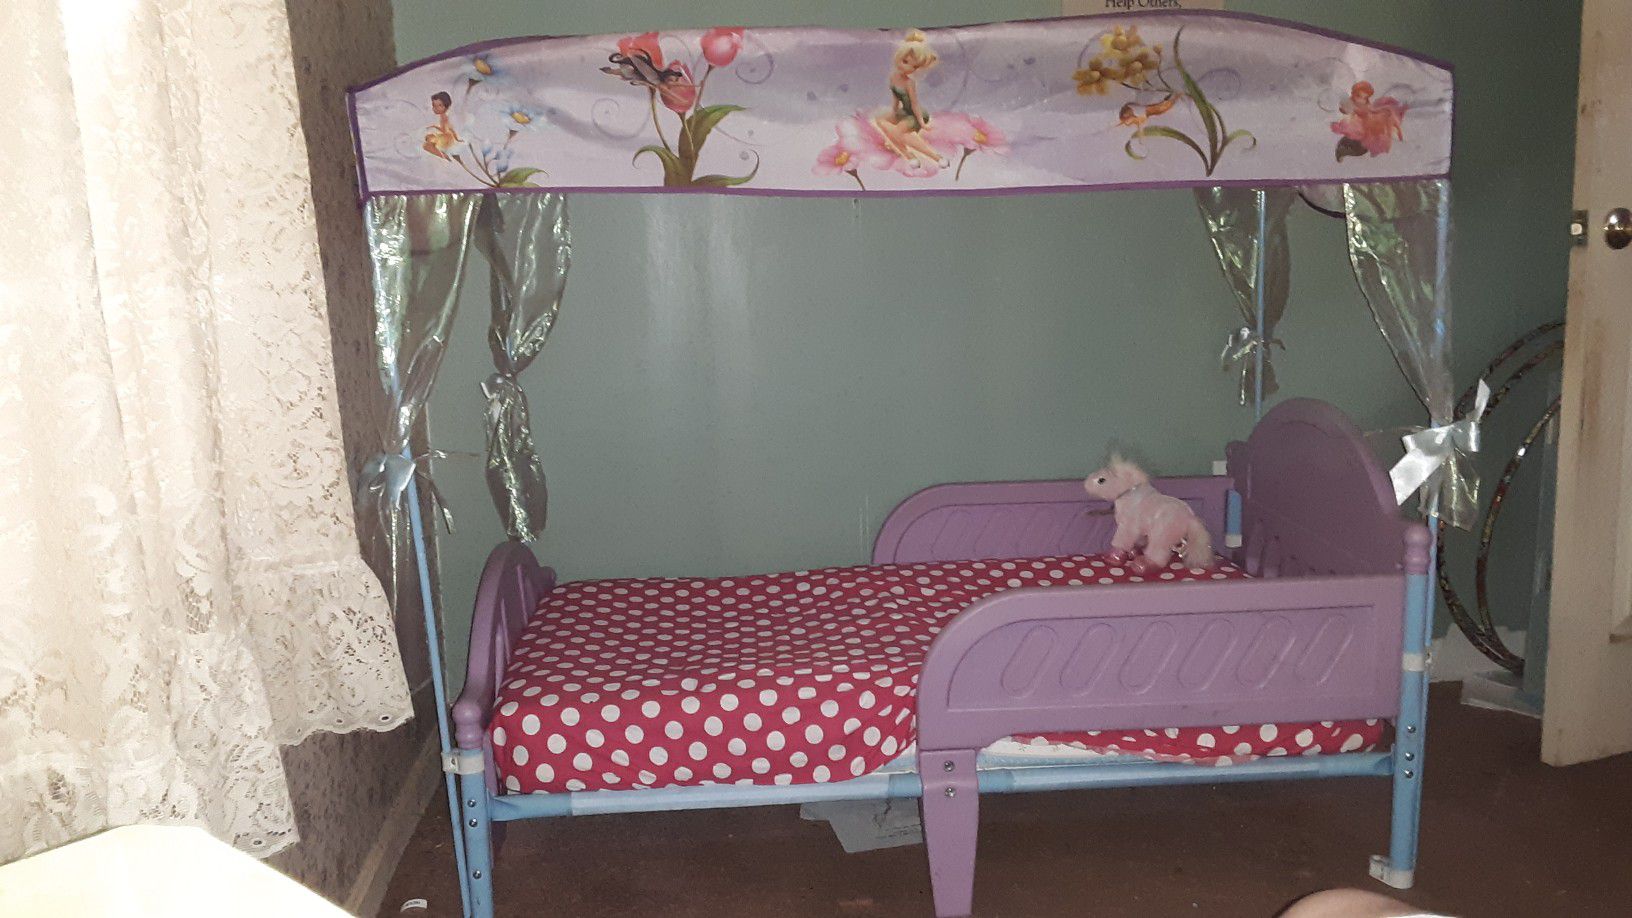 Price Reduced!! Tinkerbell canopy toddler bed